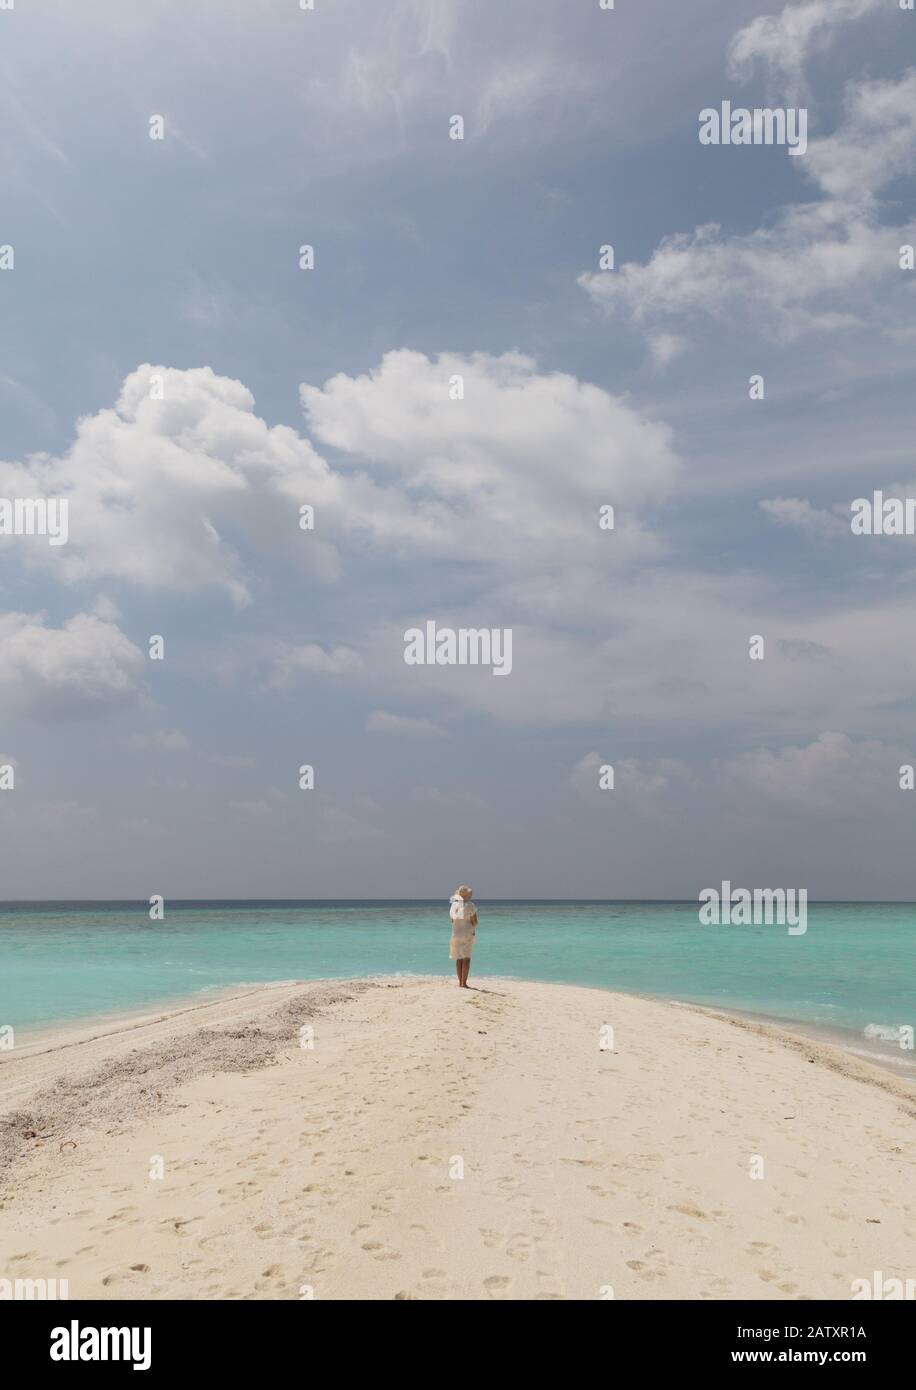 Concept Travel -Woman on beach; A lone woman standing on a tropical beach with white sand, blue sky and turquoise water, rear view,  the Maldives,Asia Stock Photo